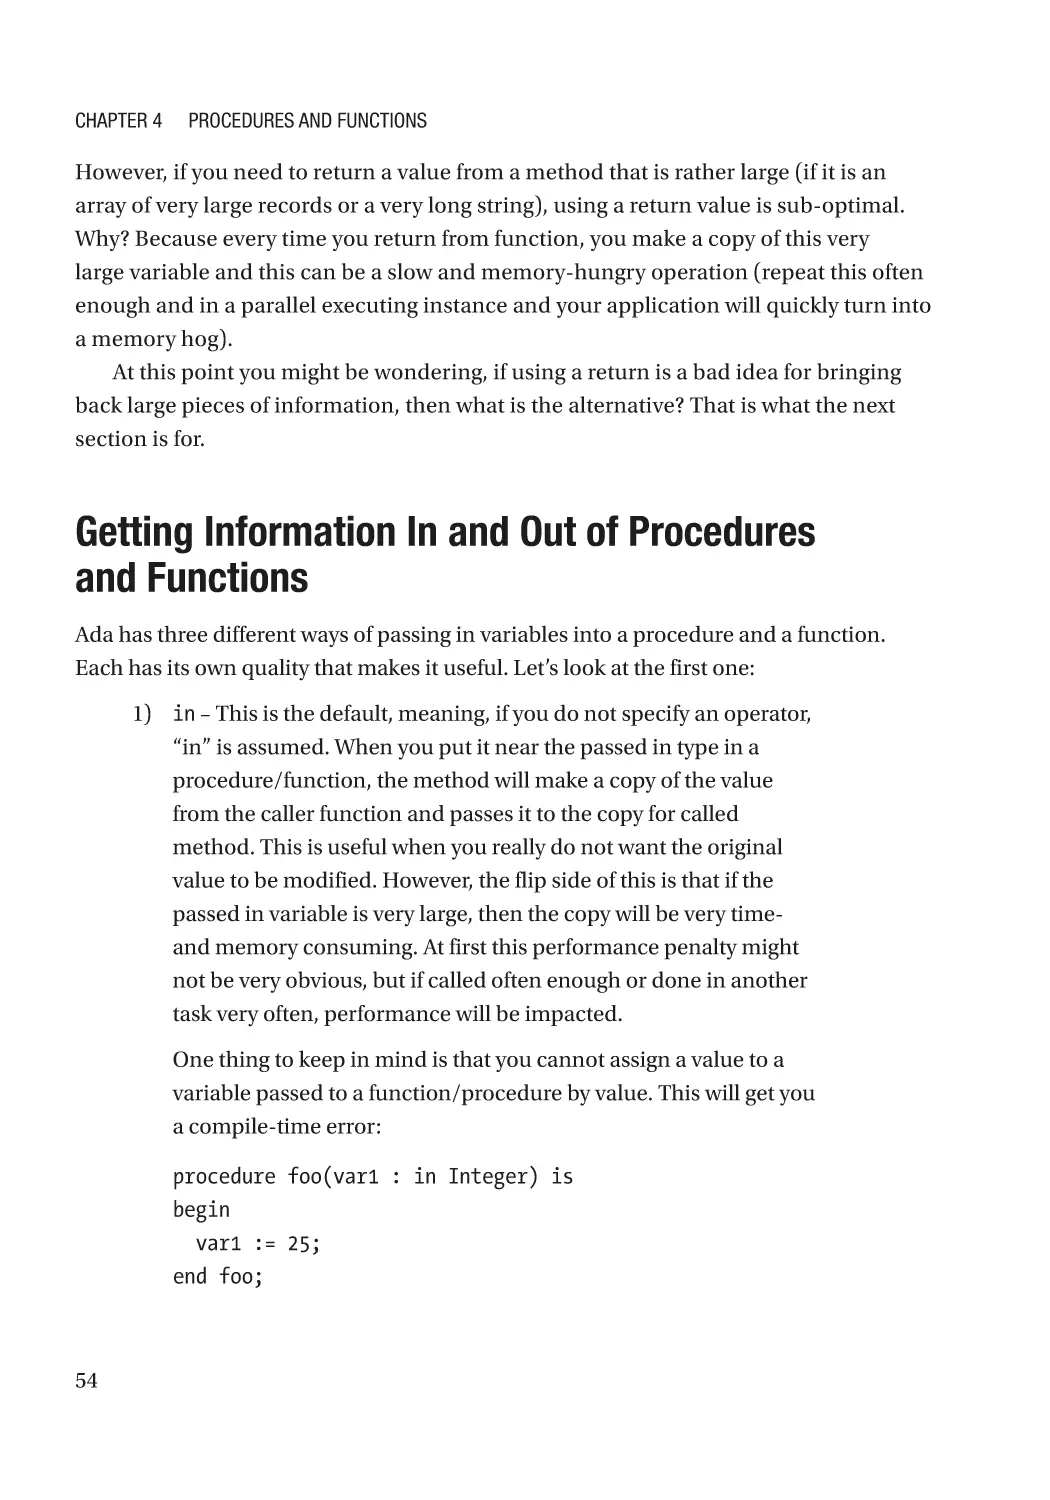 Getting Information In and Out of Procedures and Functions